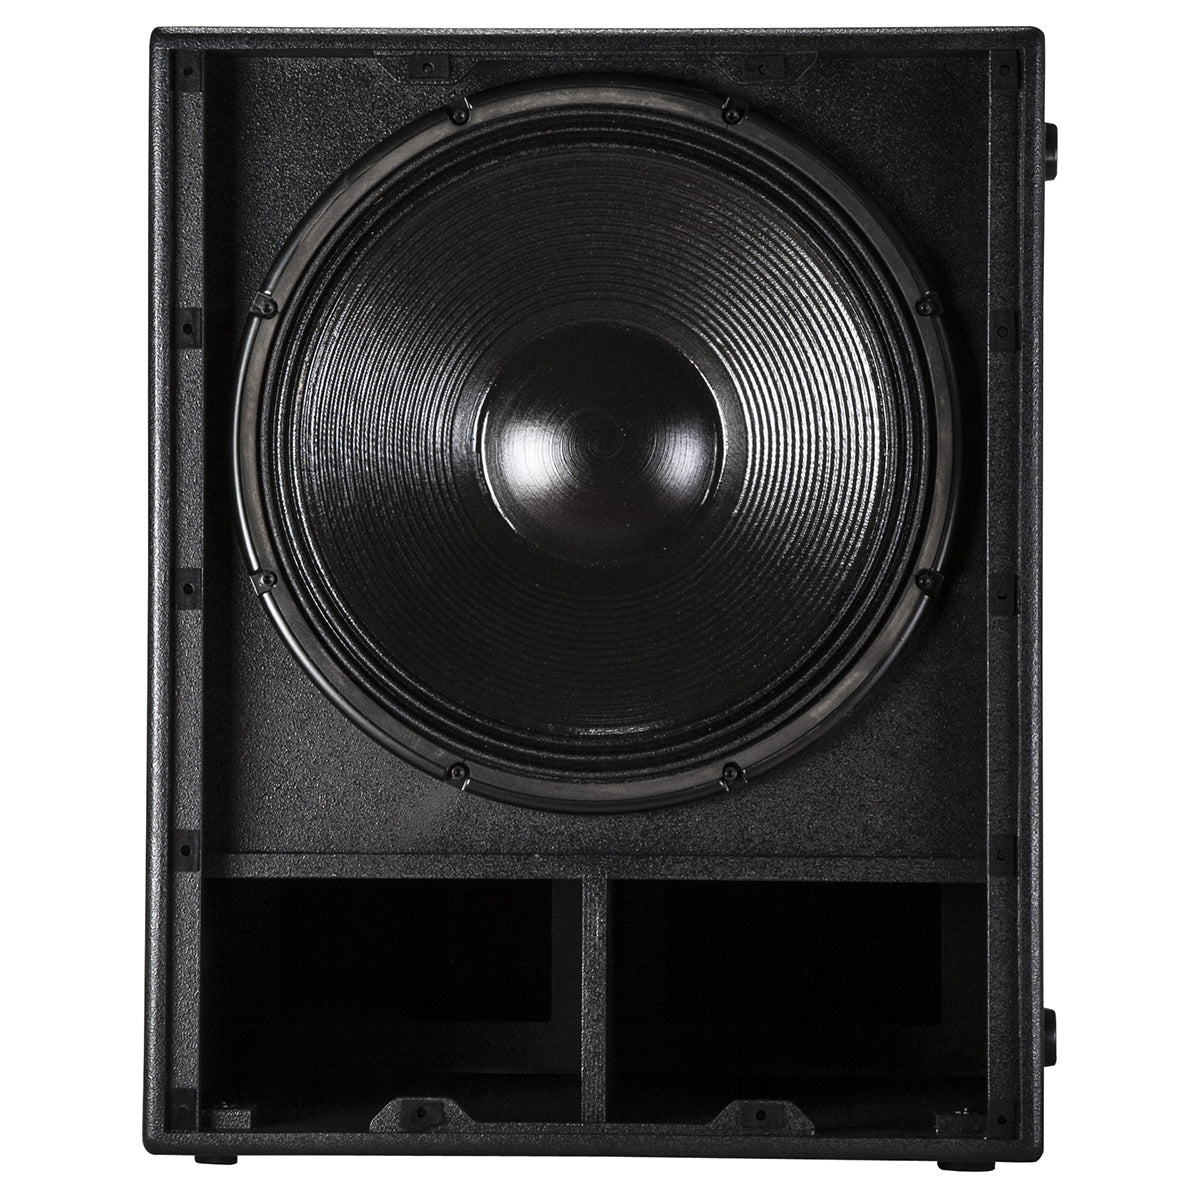 RCF SUB8004-AS Active High Power Subwoofer